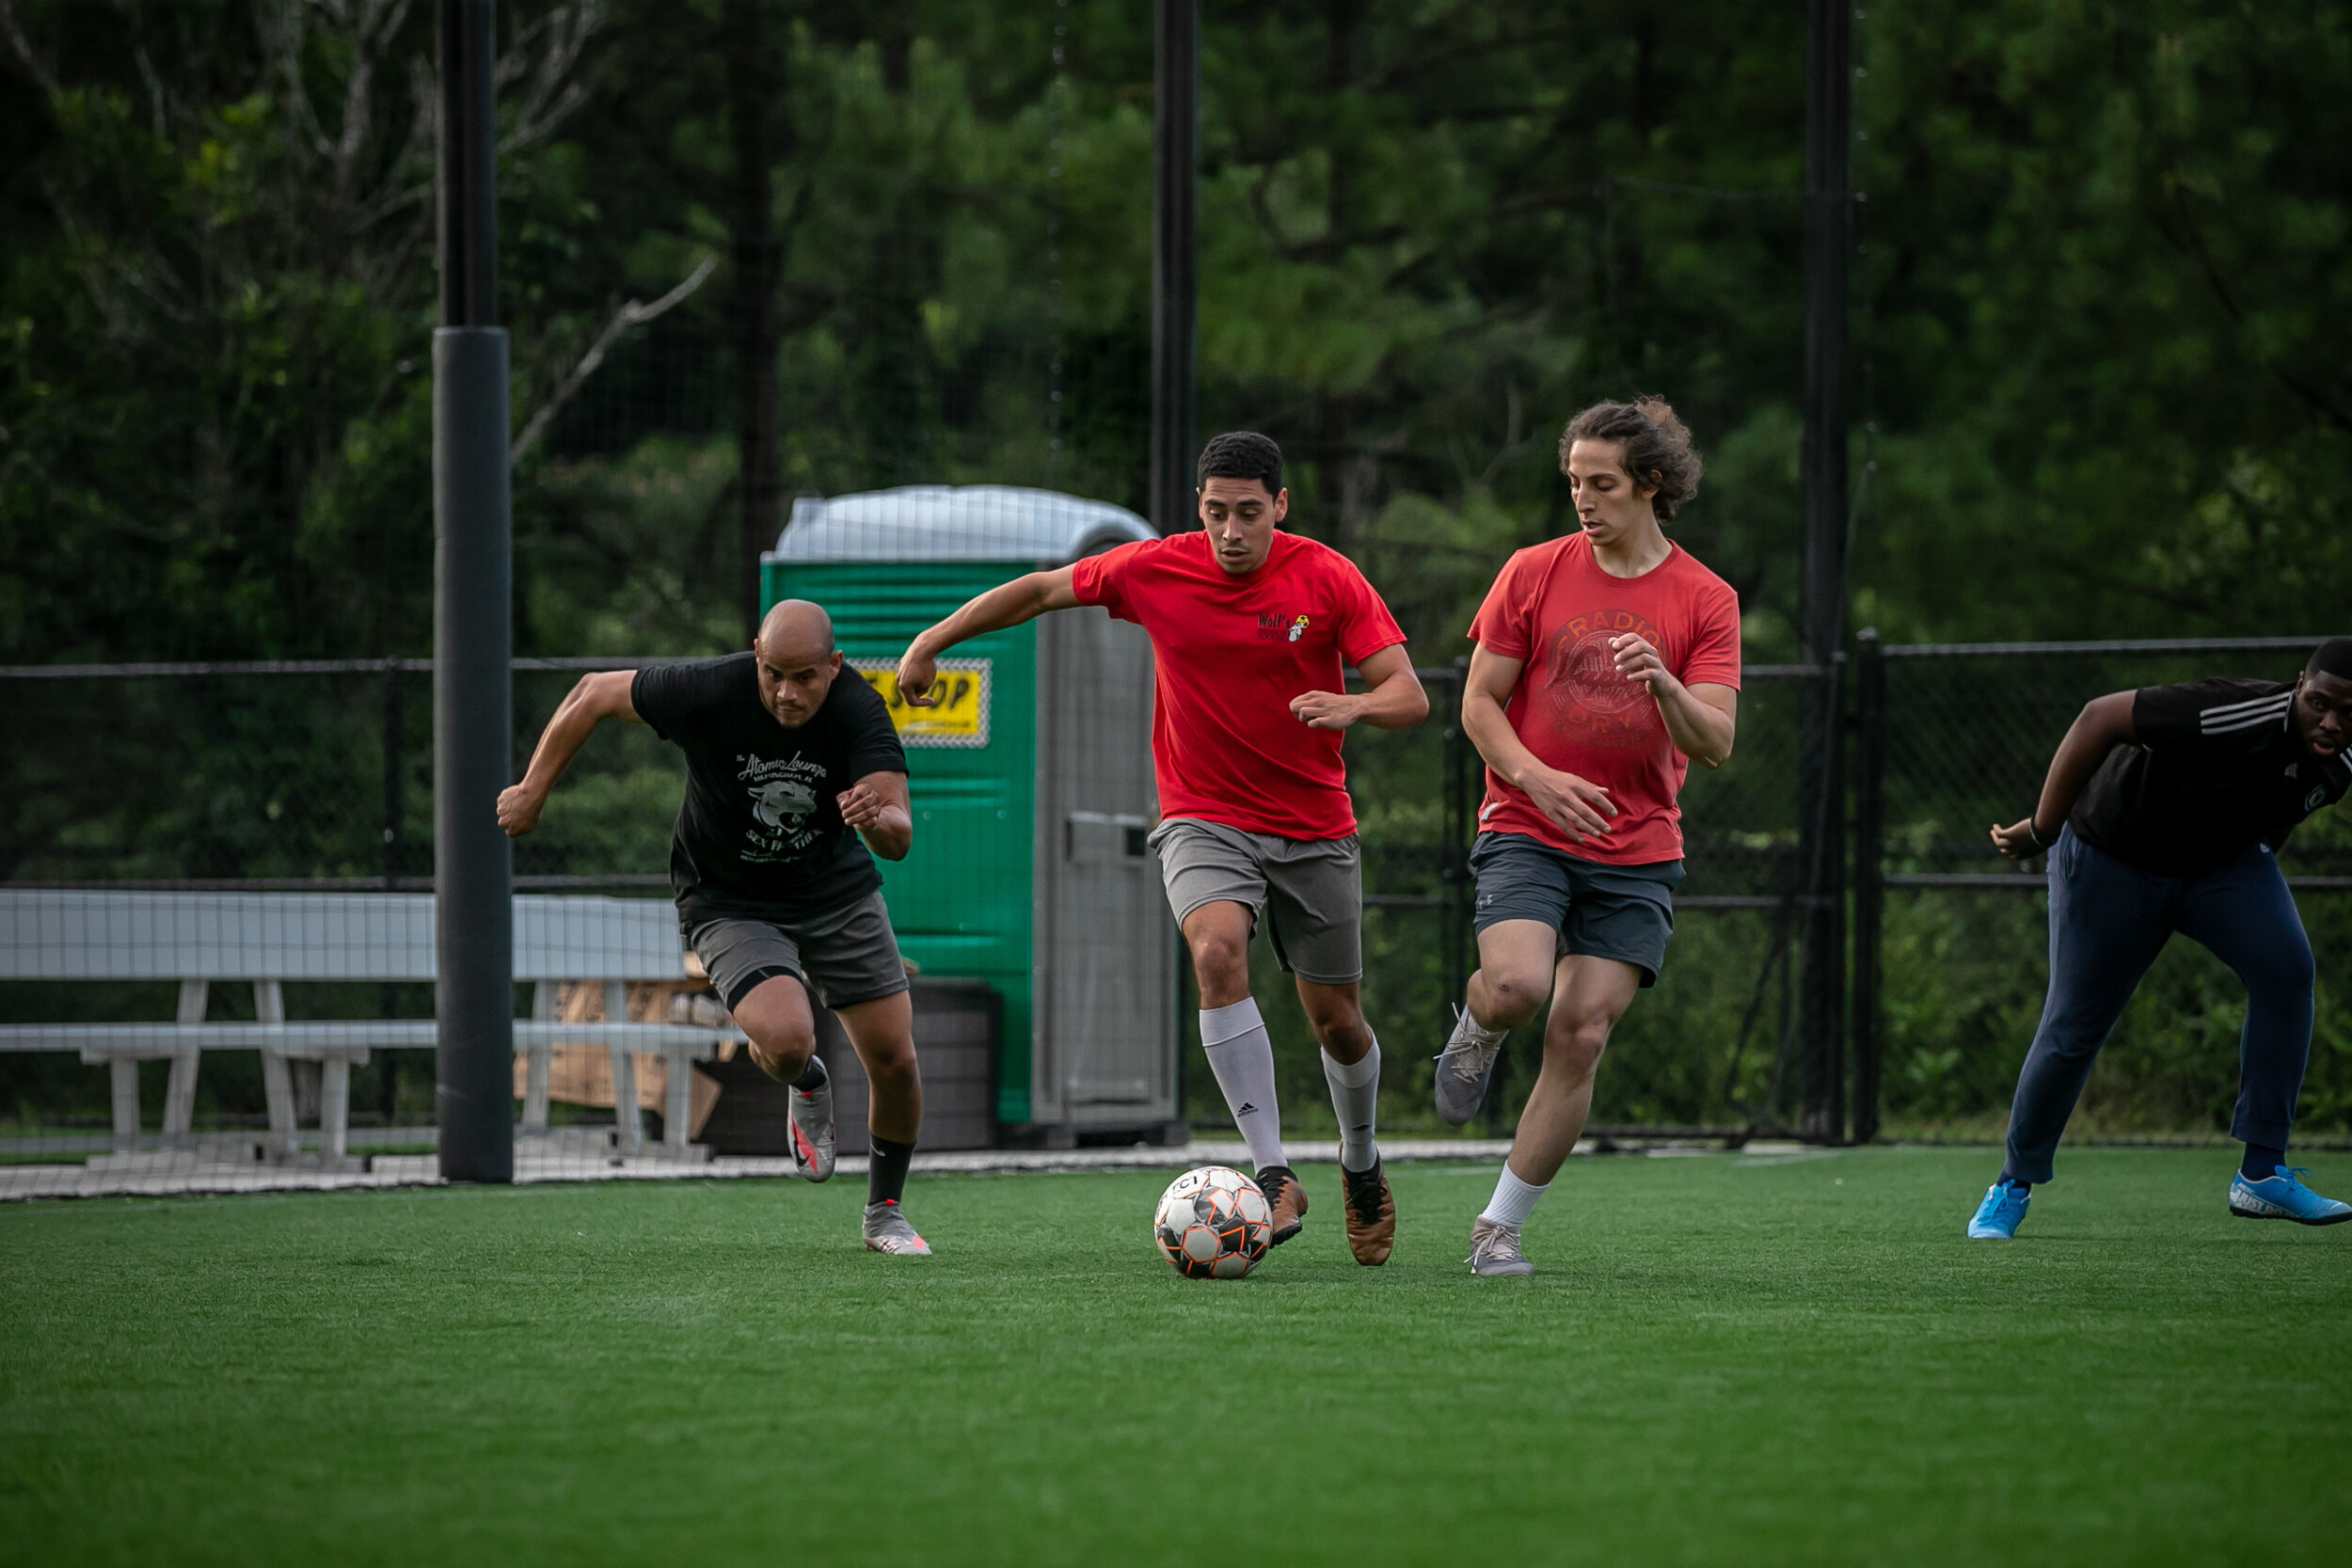 Mens and Womens Adult Recreational Soccer — Soccer in the Streets image